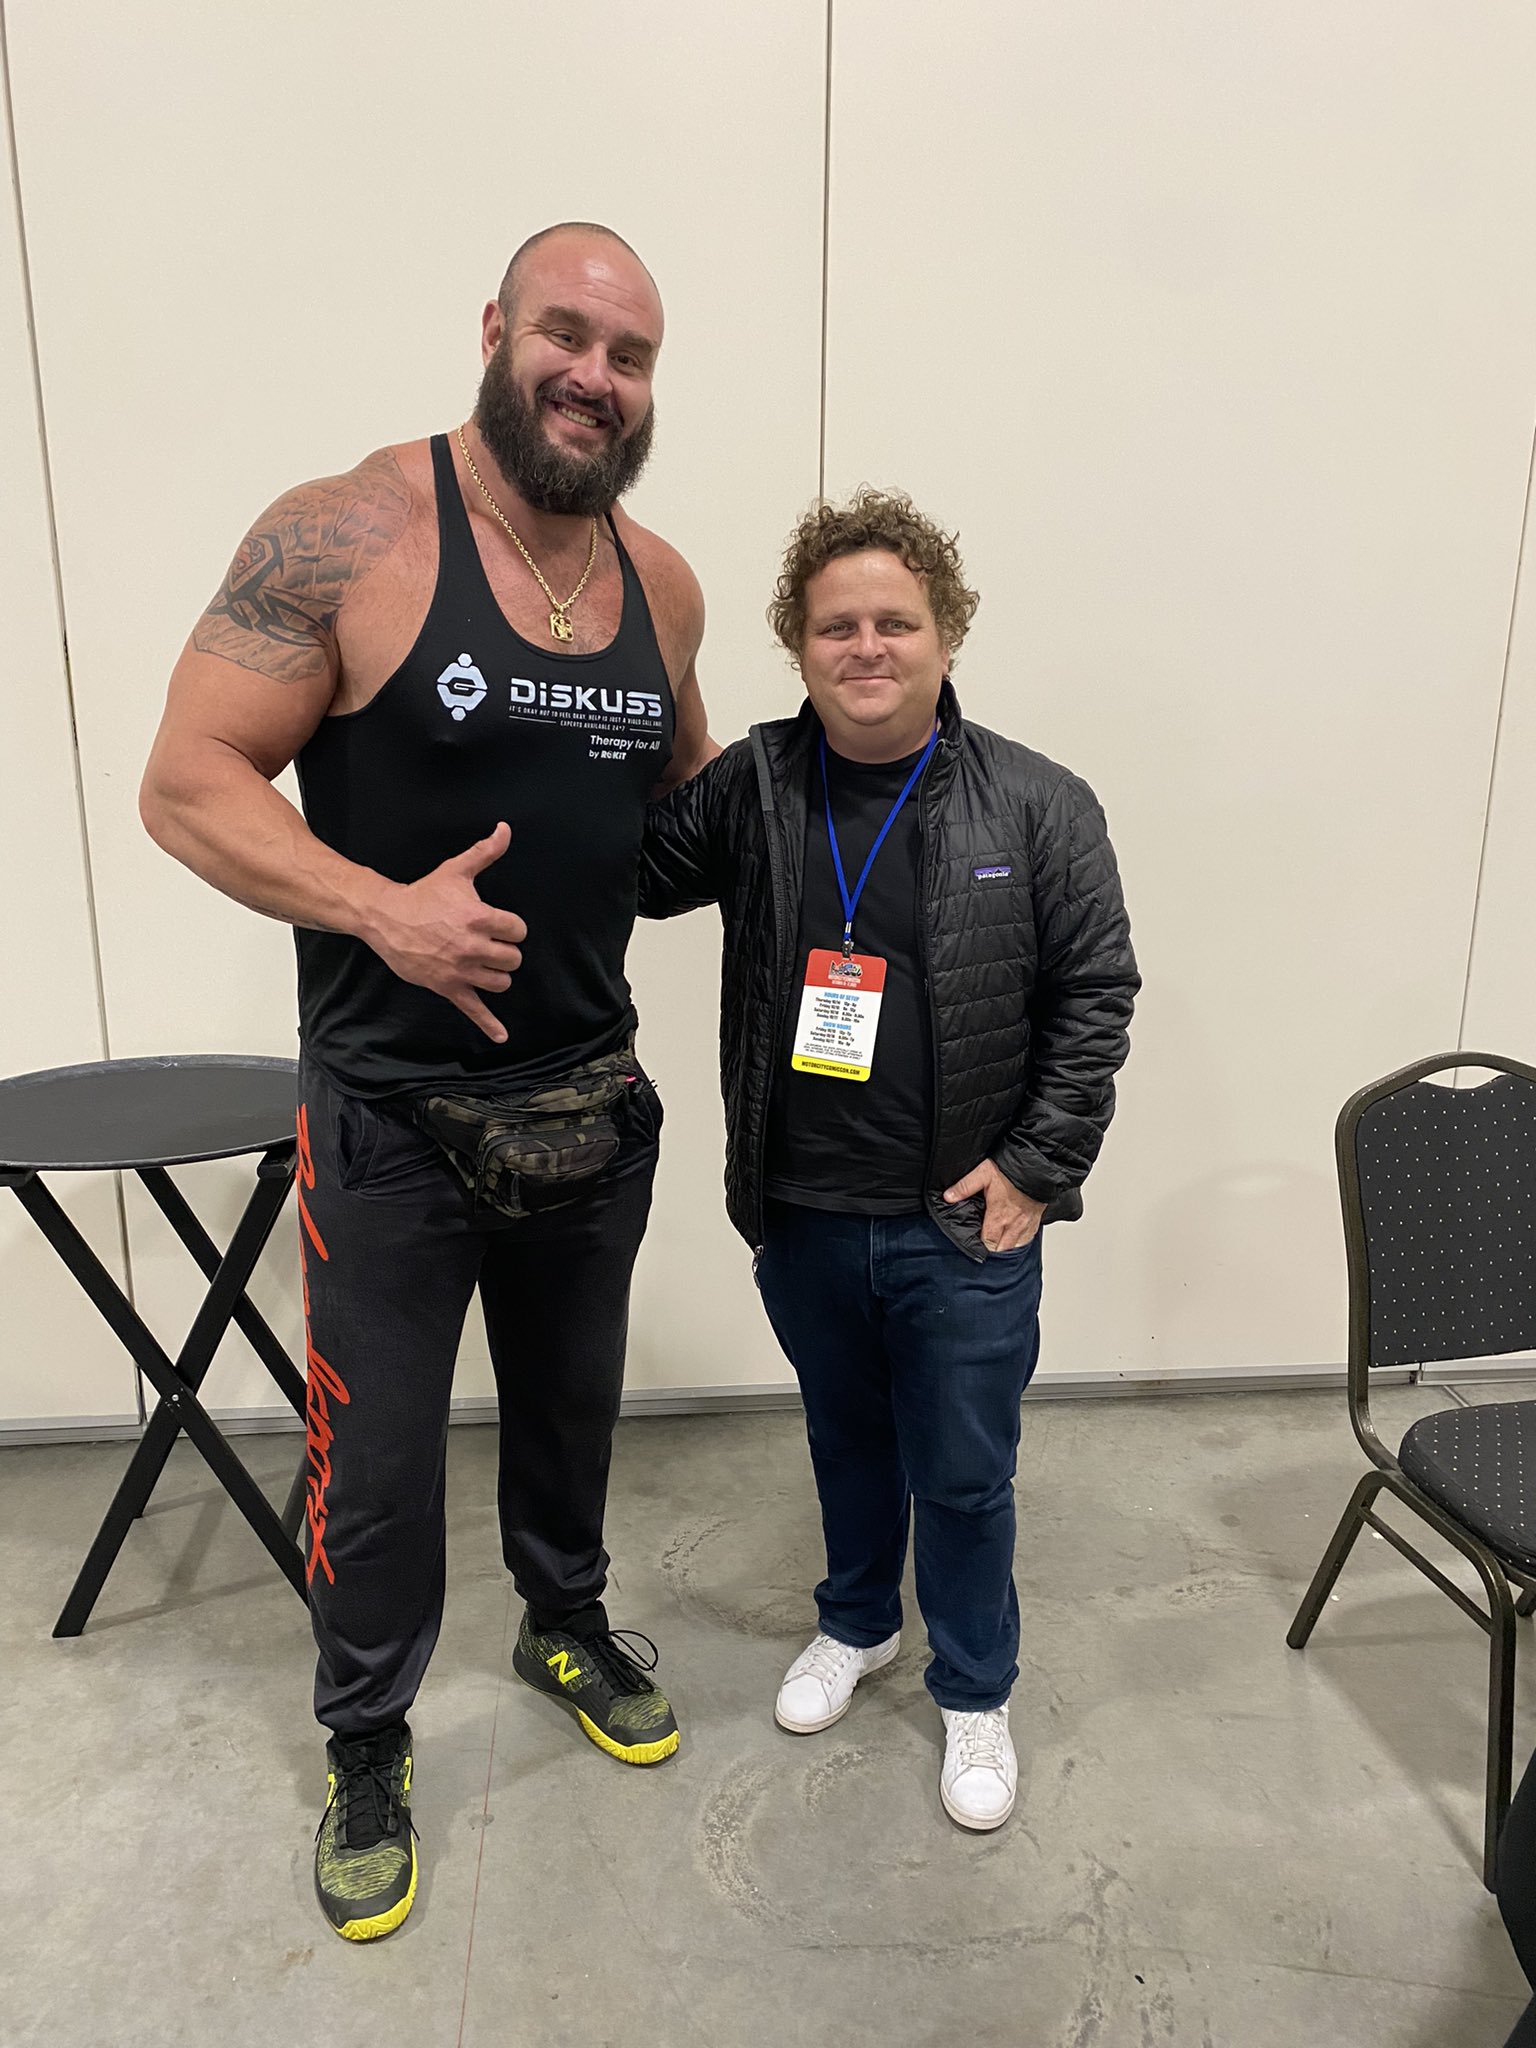 Adam Scherr on Twitter: "Ya I marked out for @PatrickRenna when I saw backstage at #MotorCityComiccon #TheGreatHambino #TheSandlot https://t.co/yPps3gQz7h" / Twitter